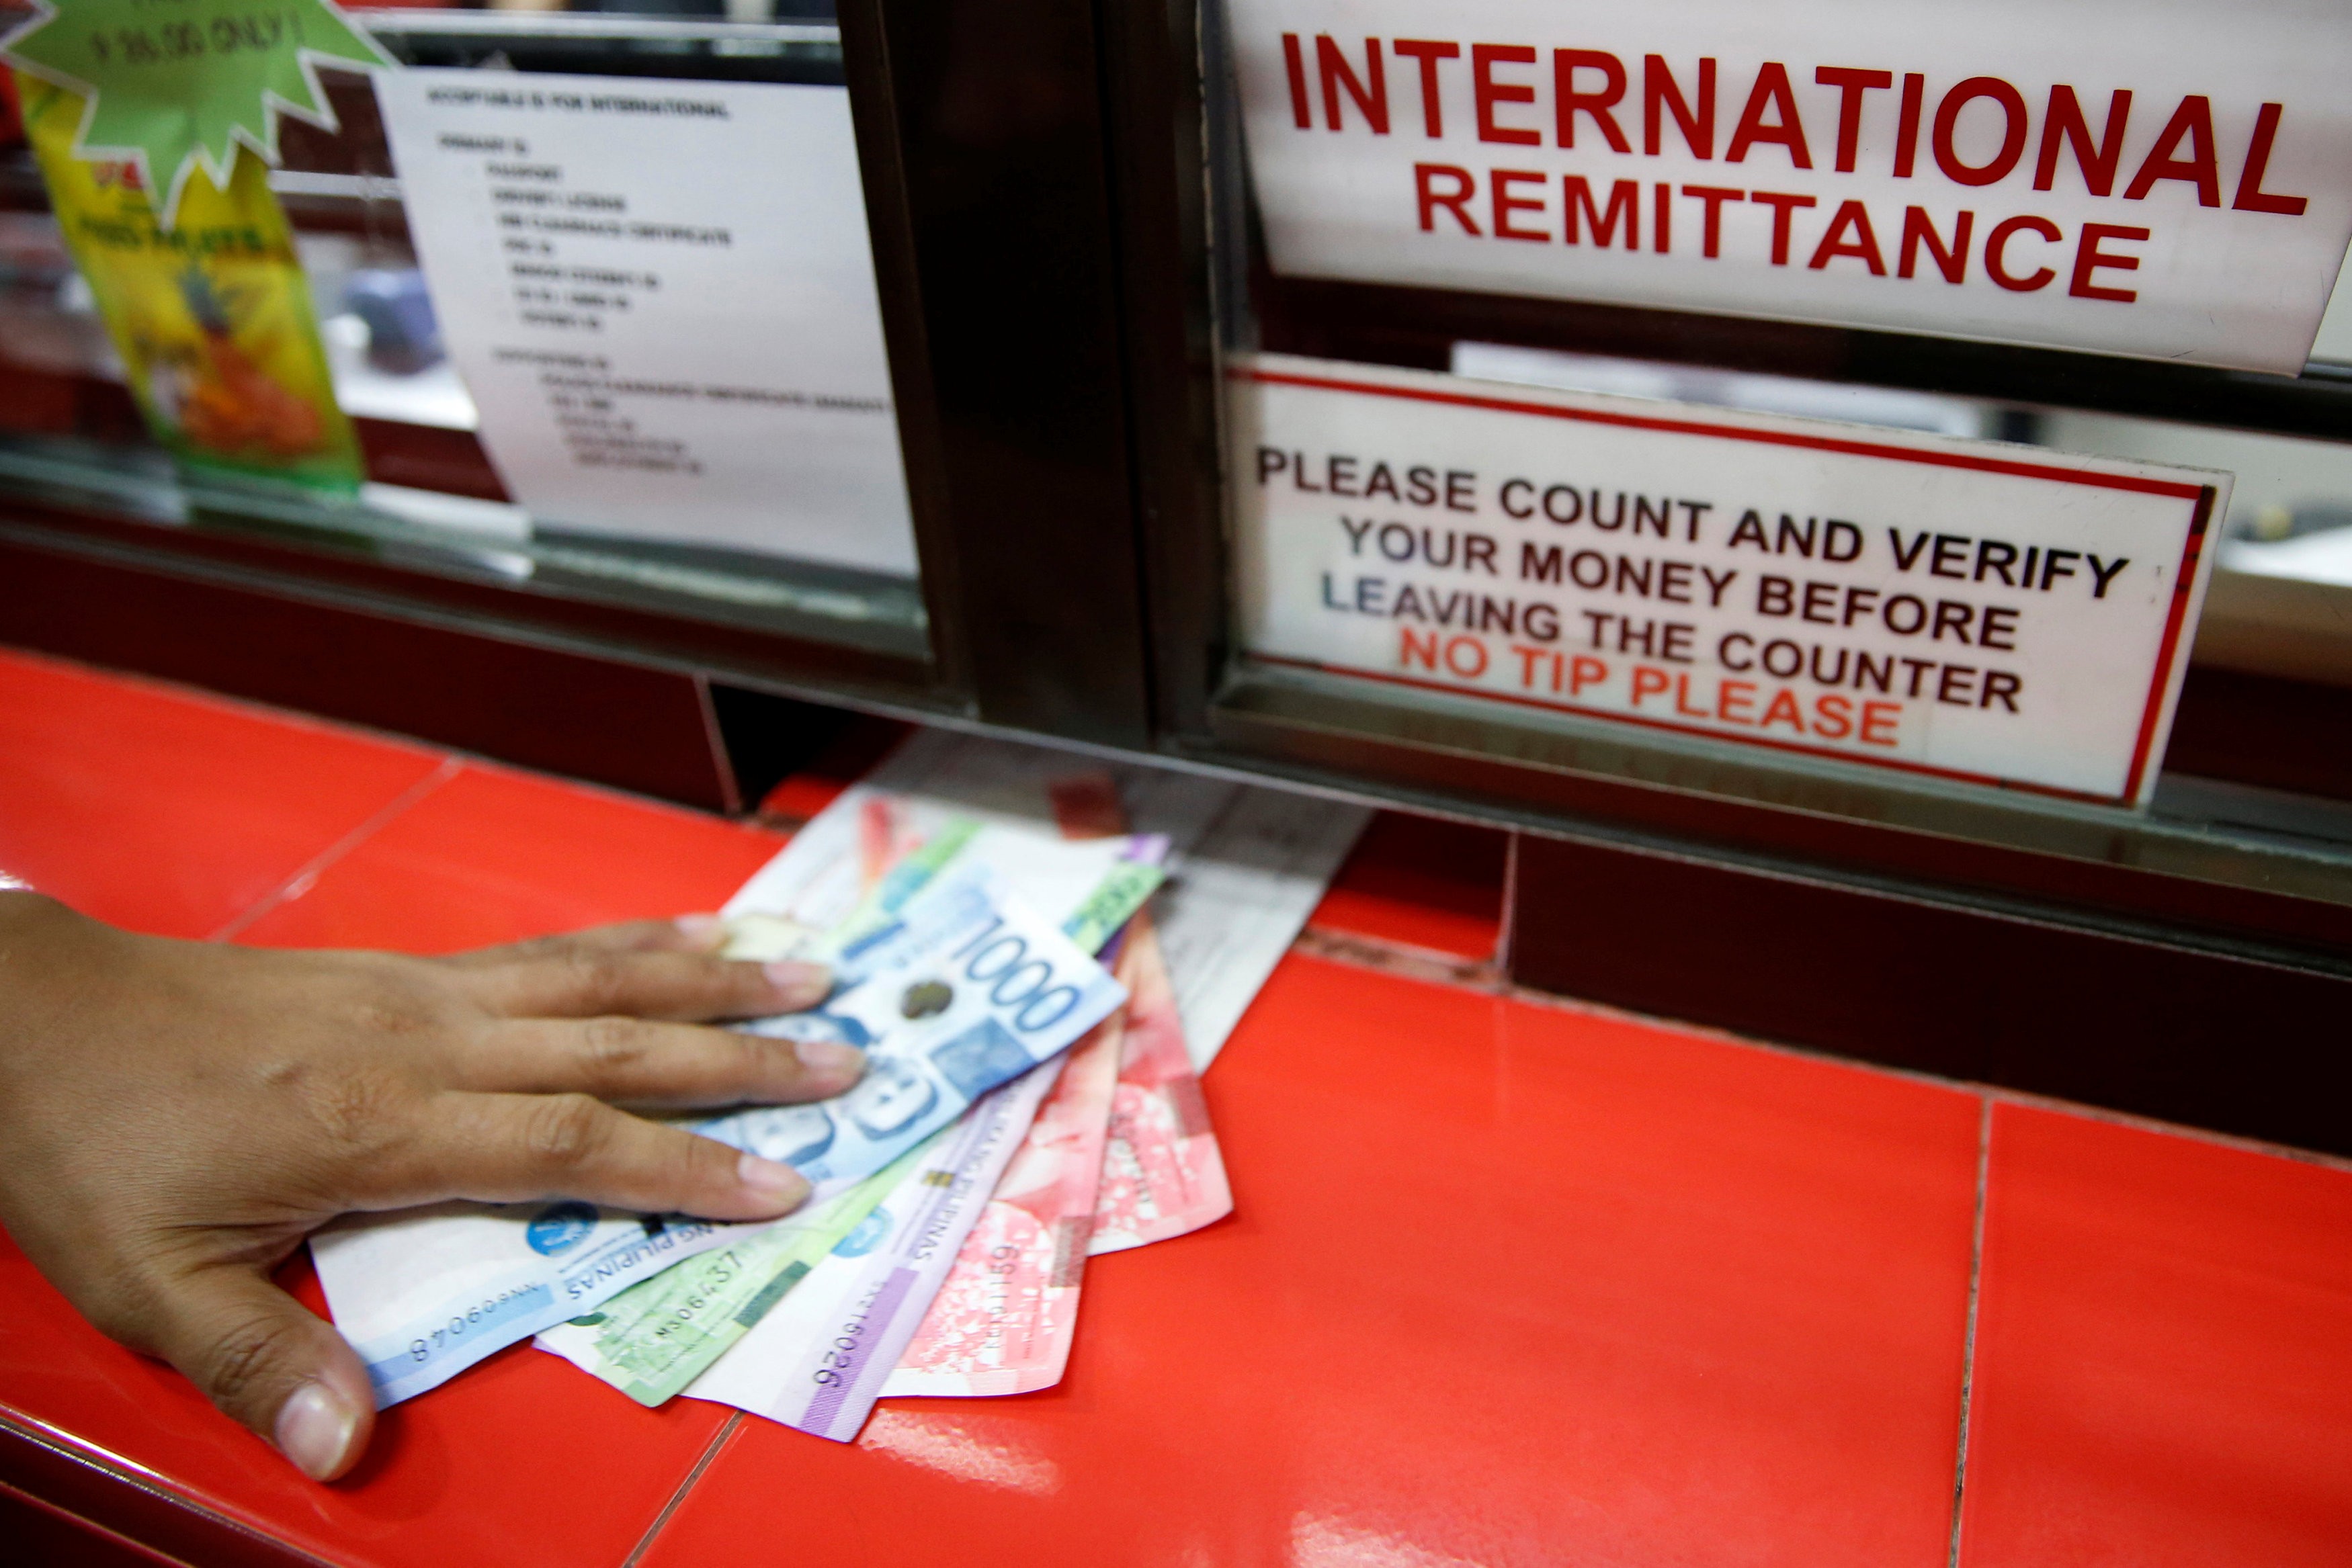 A fall in the Philippine currency could have meant greater spending power back home for migrants – instead overseas Filipinos have found rising prices in their home country leave them worse off than before